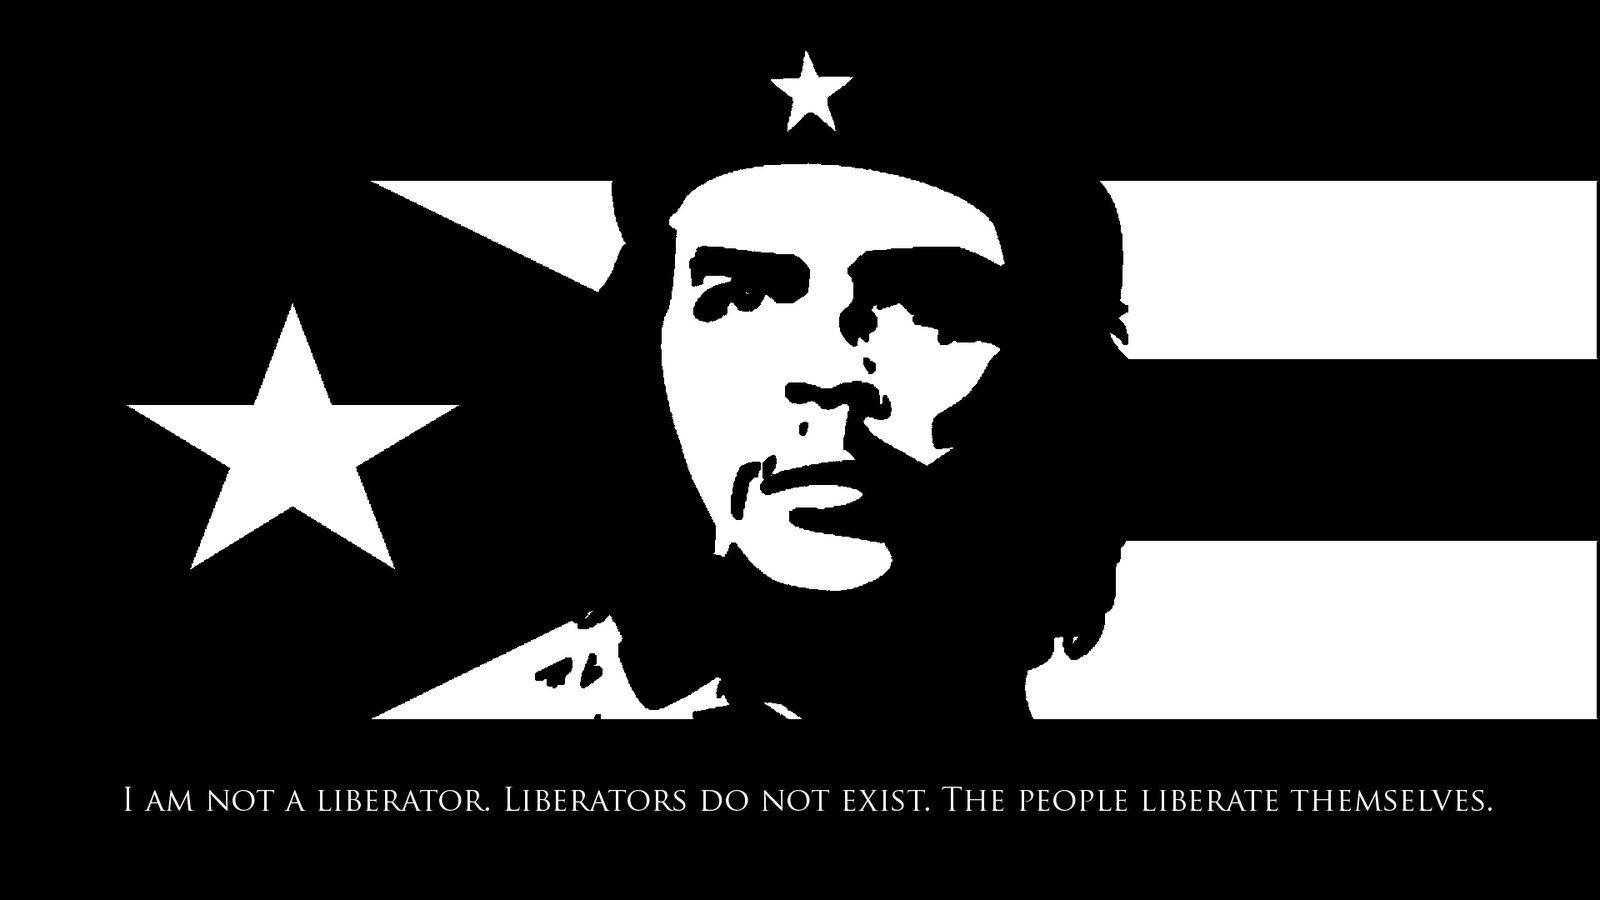 I am not a liberator. Liberators do not exist. The people liberate